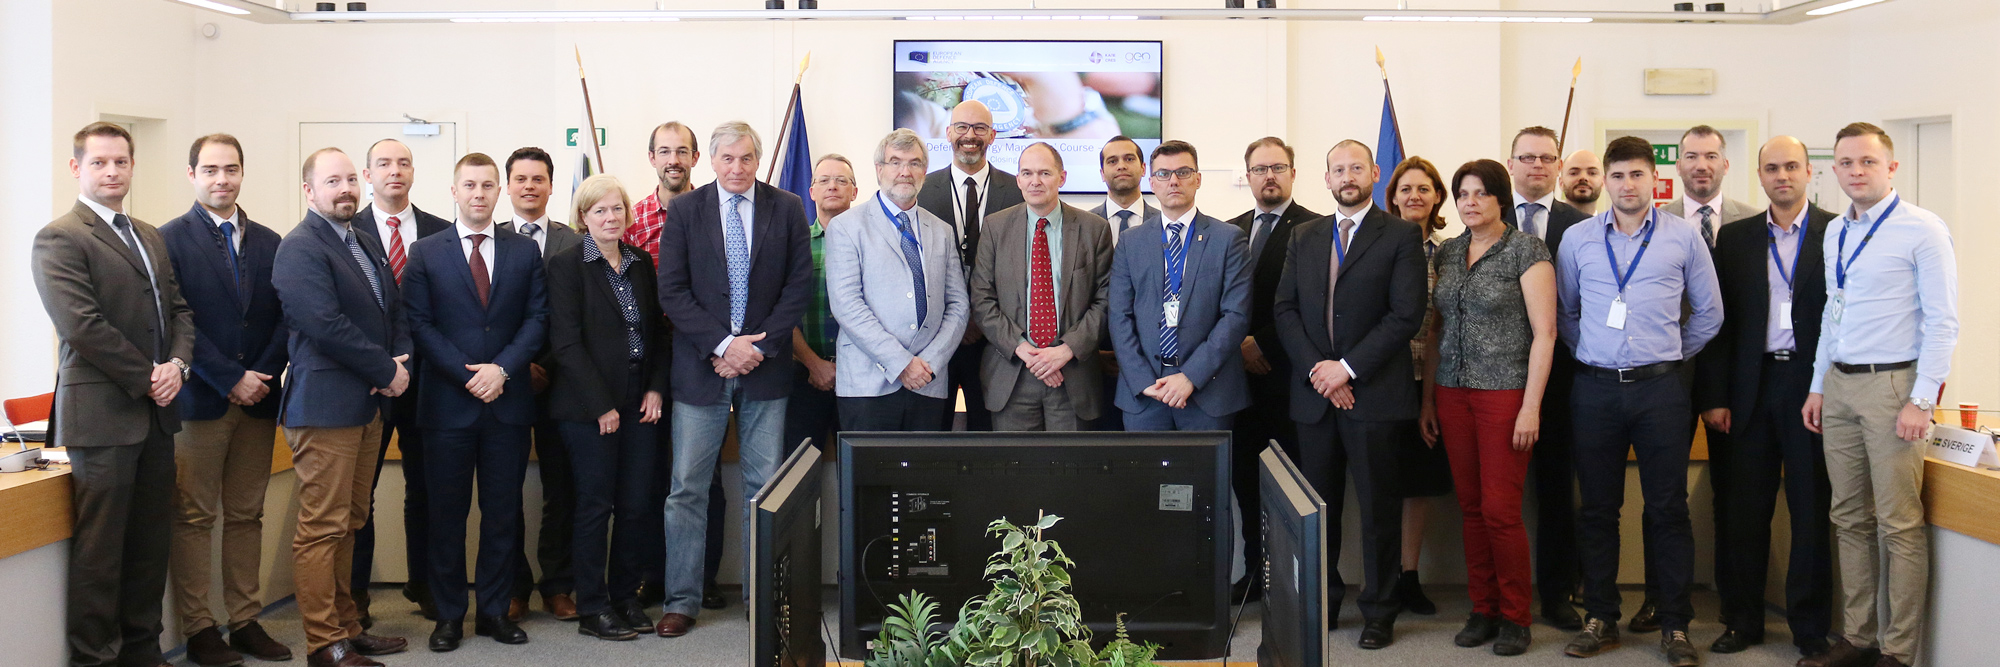 First EDA Defence Energy Managers Course successfully concluded 